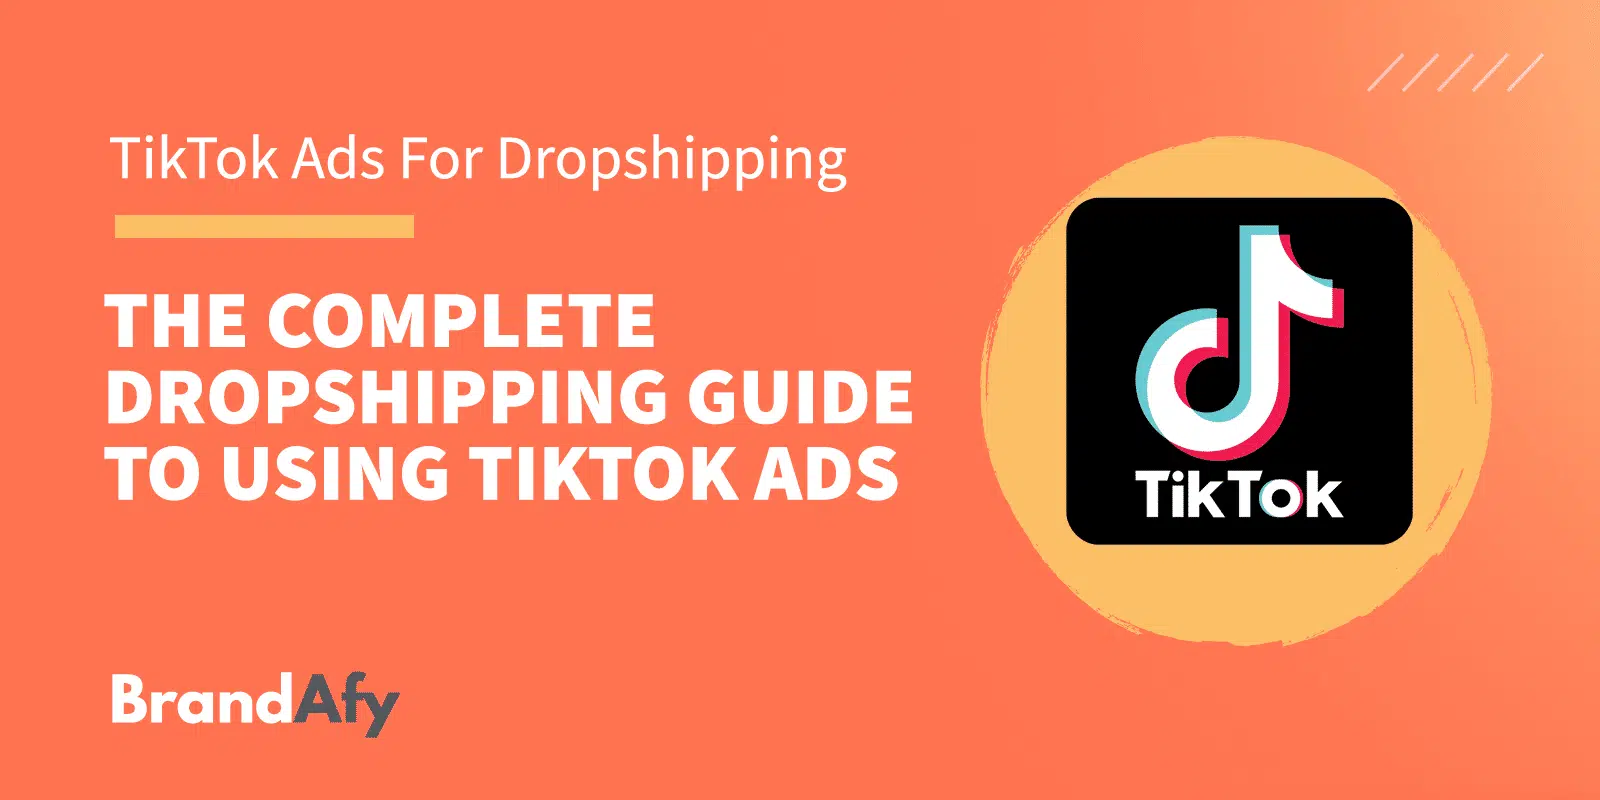 tiktok ads dropshipping guide featured